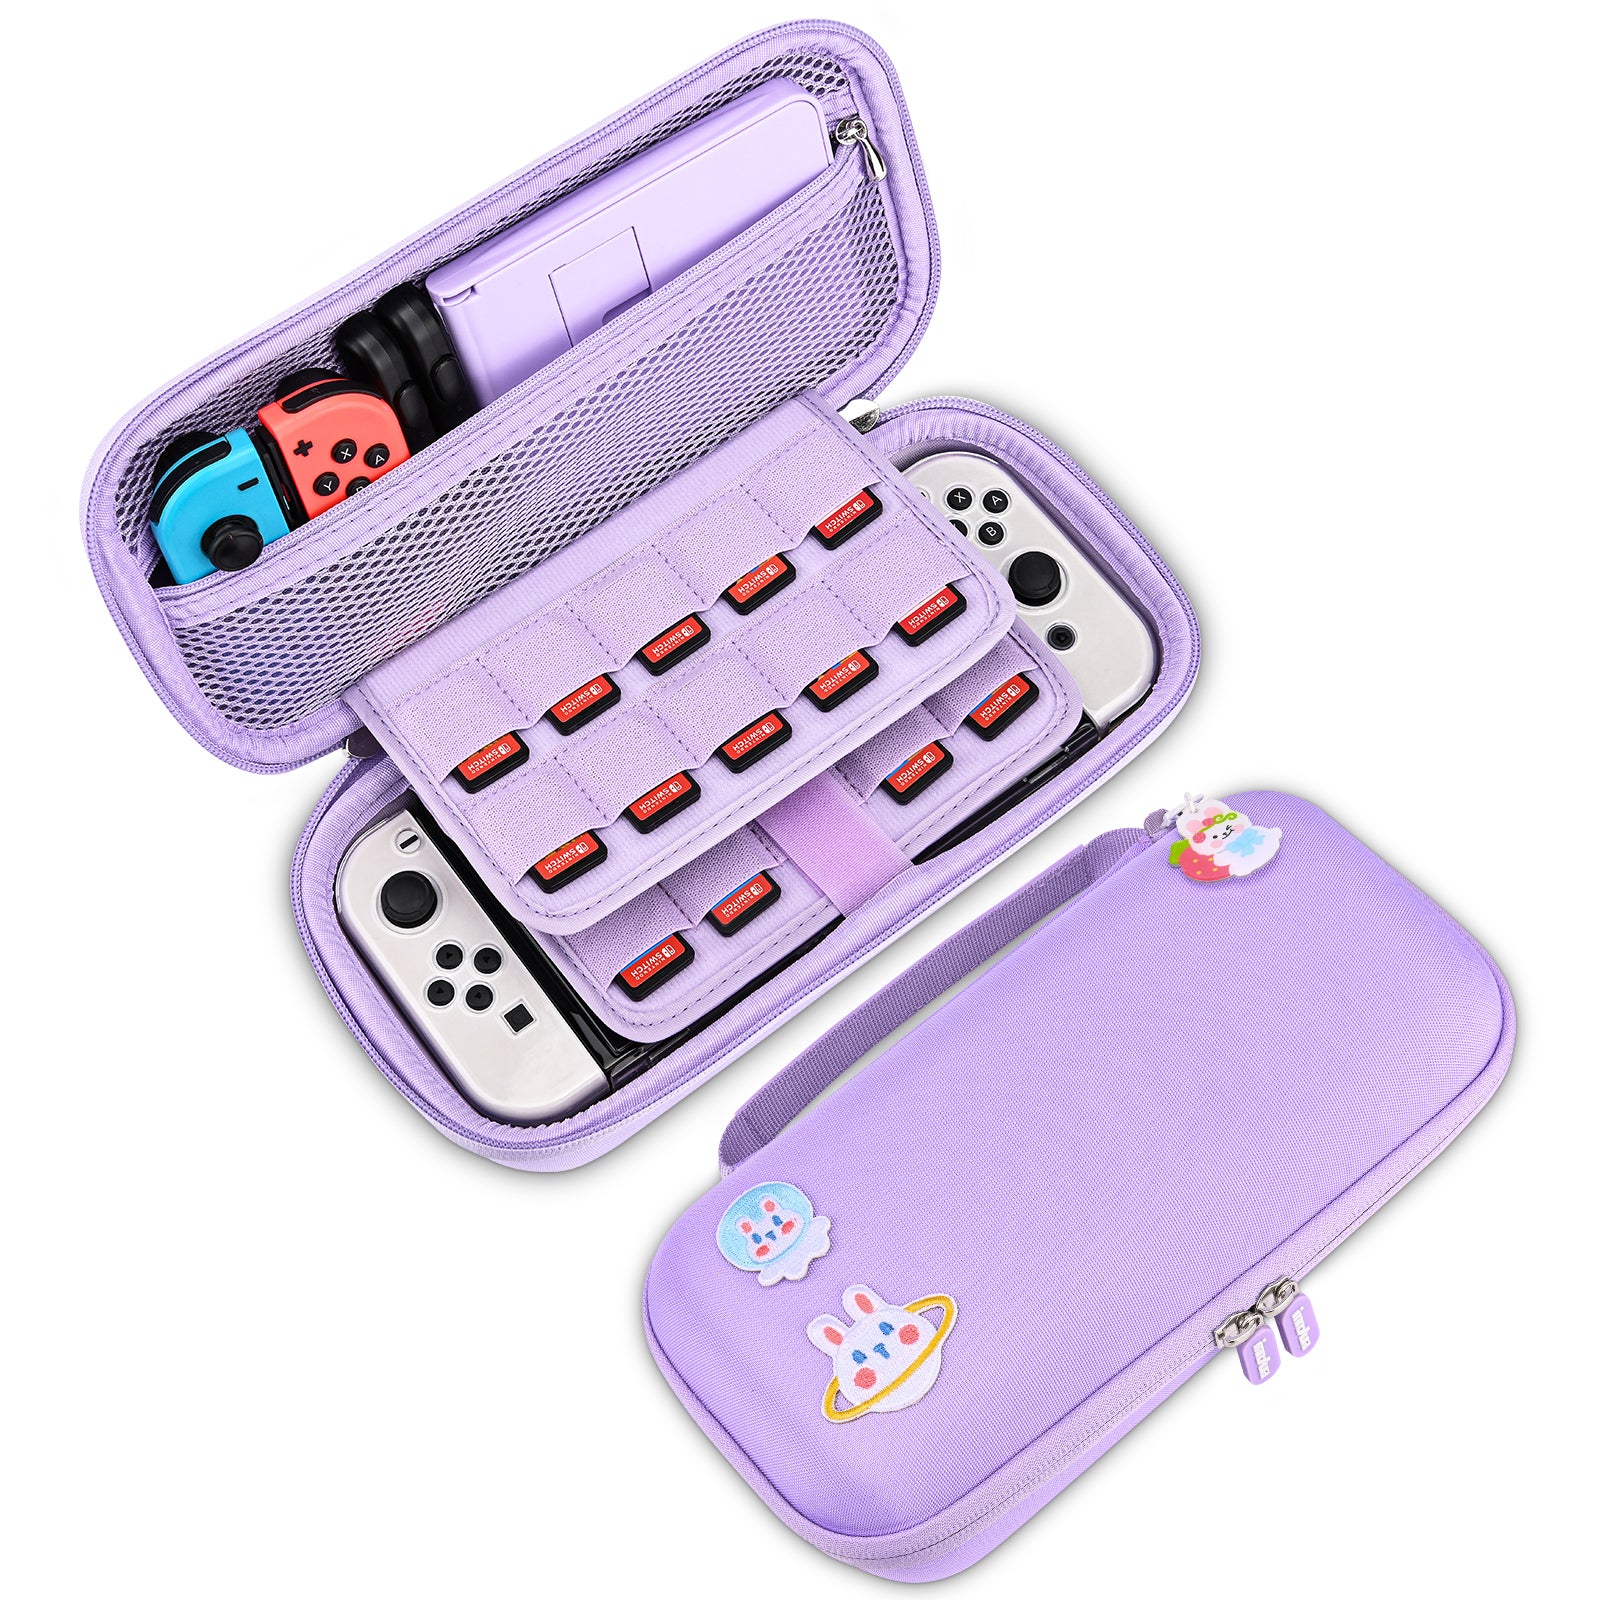 innoAura Carrying Case for Nintendo Switch OLED with 18 Accessories Gift Choice for Gamer